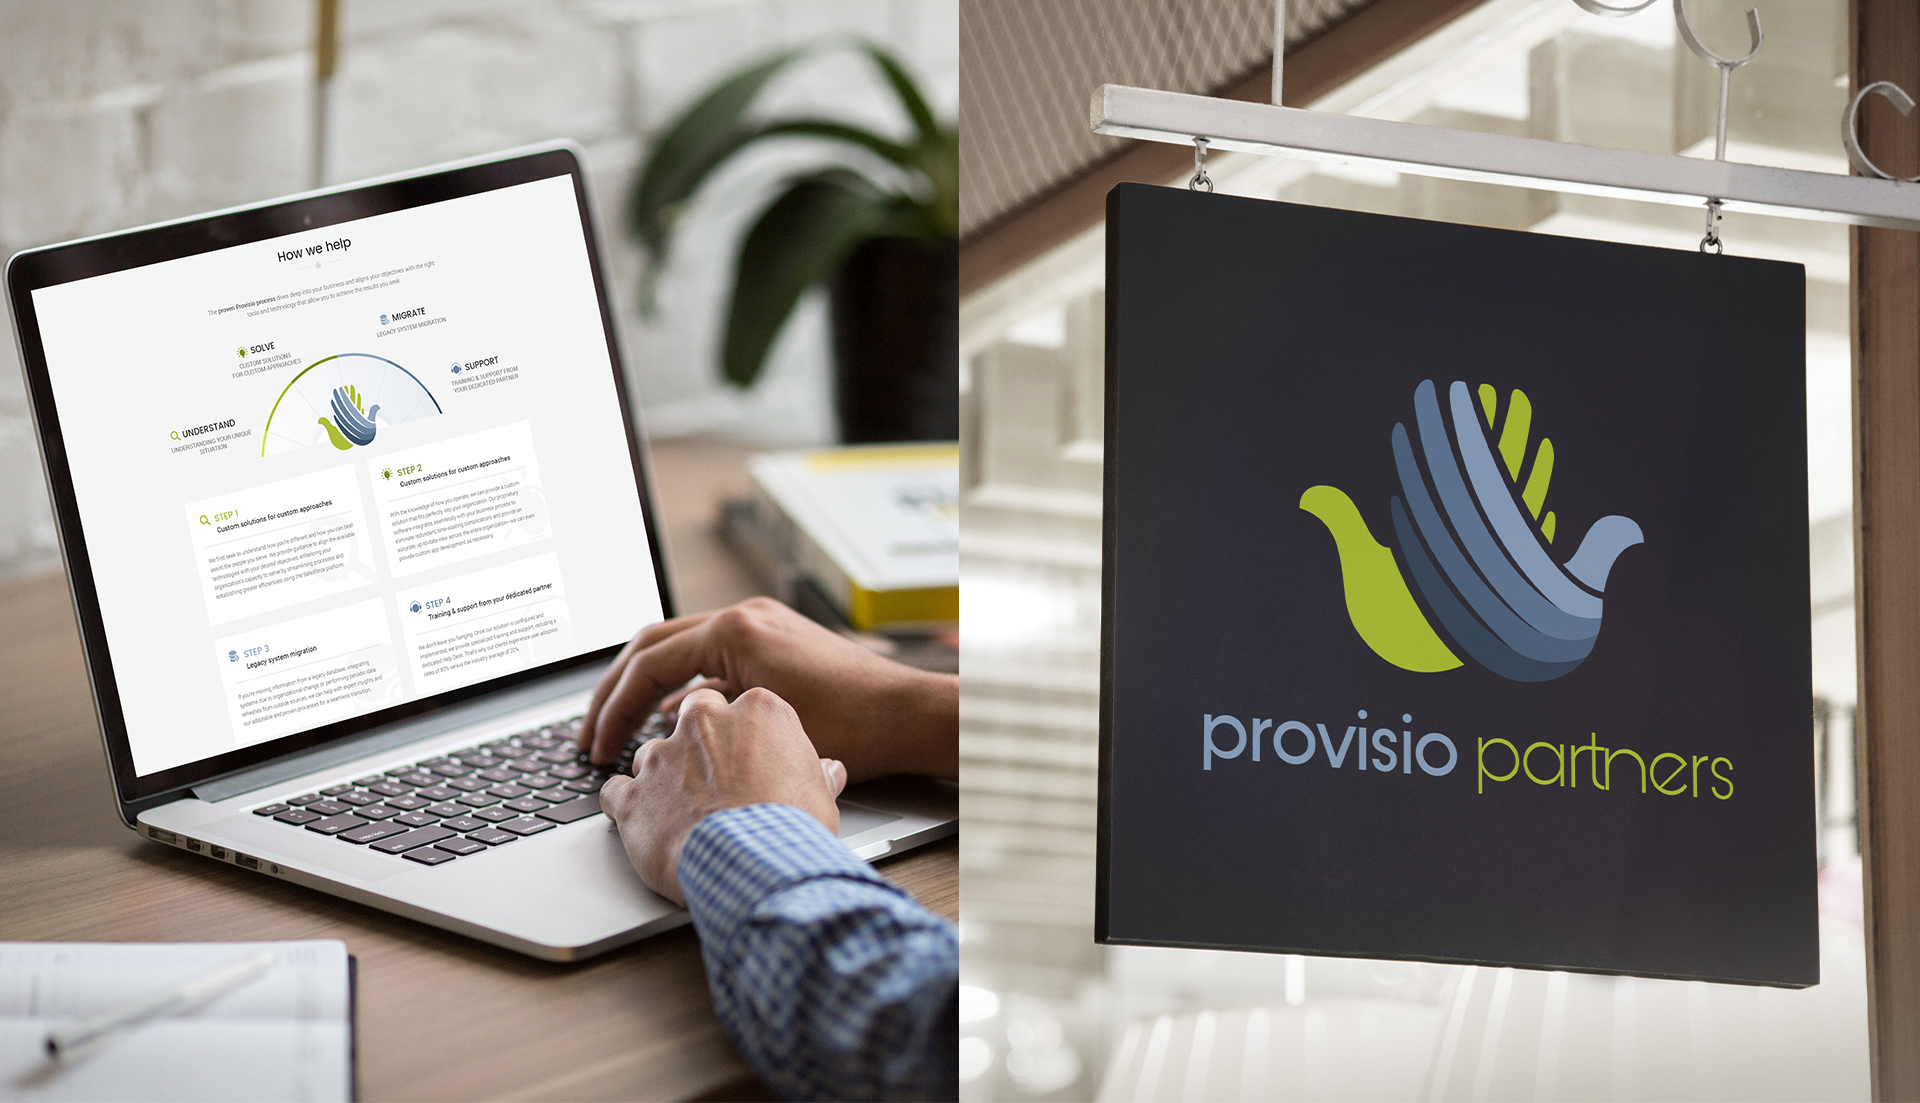 Provisio Partners sign and website2